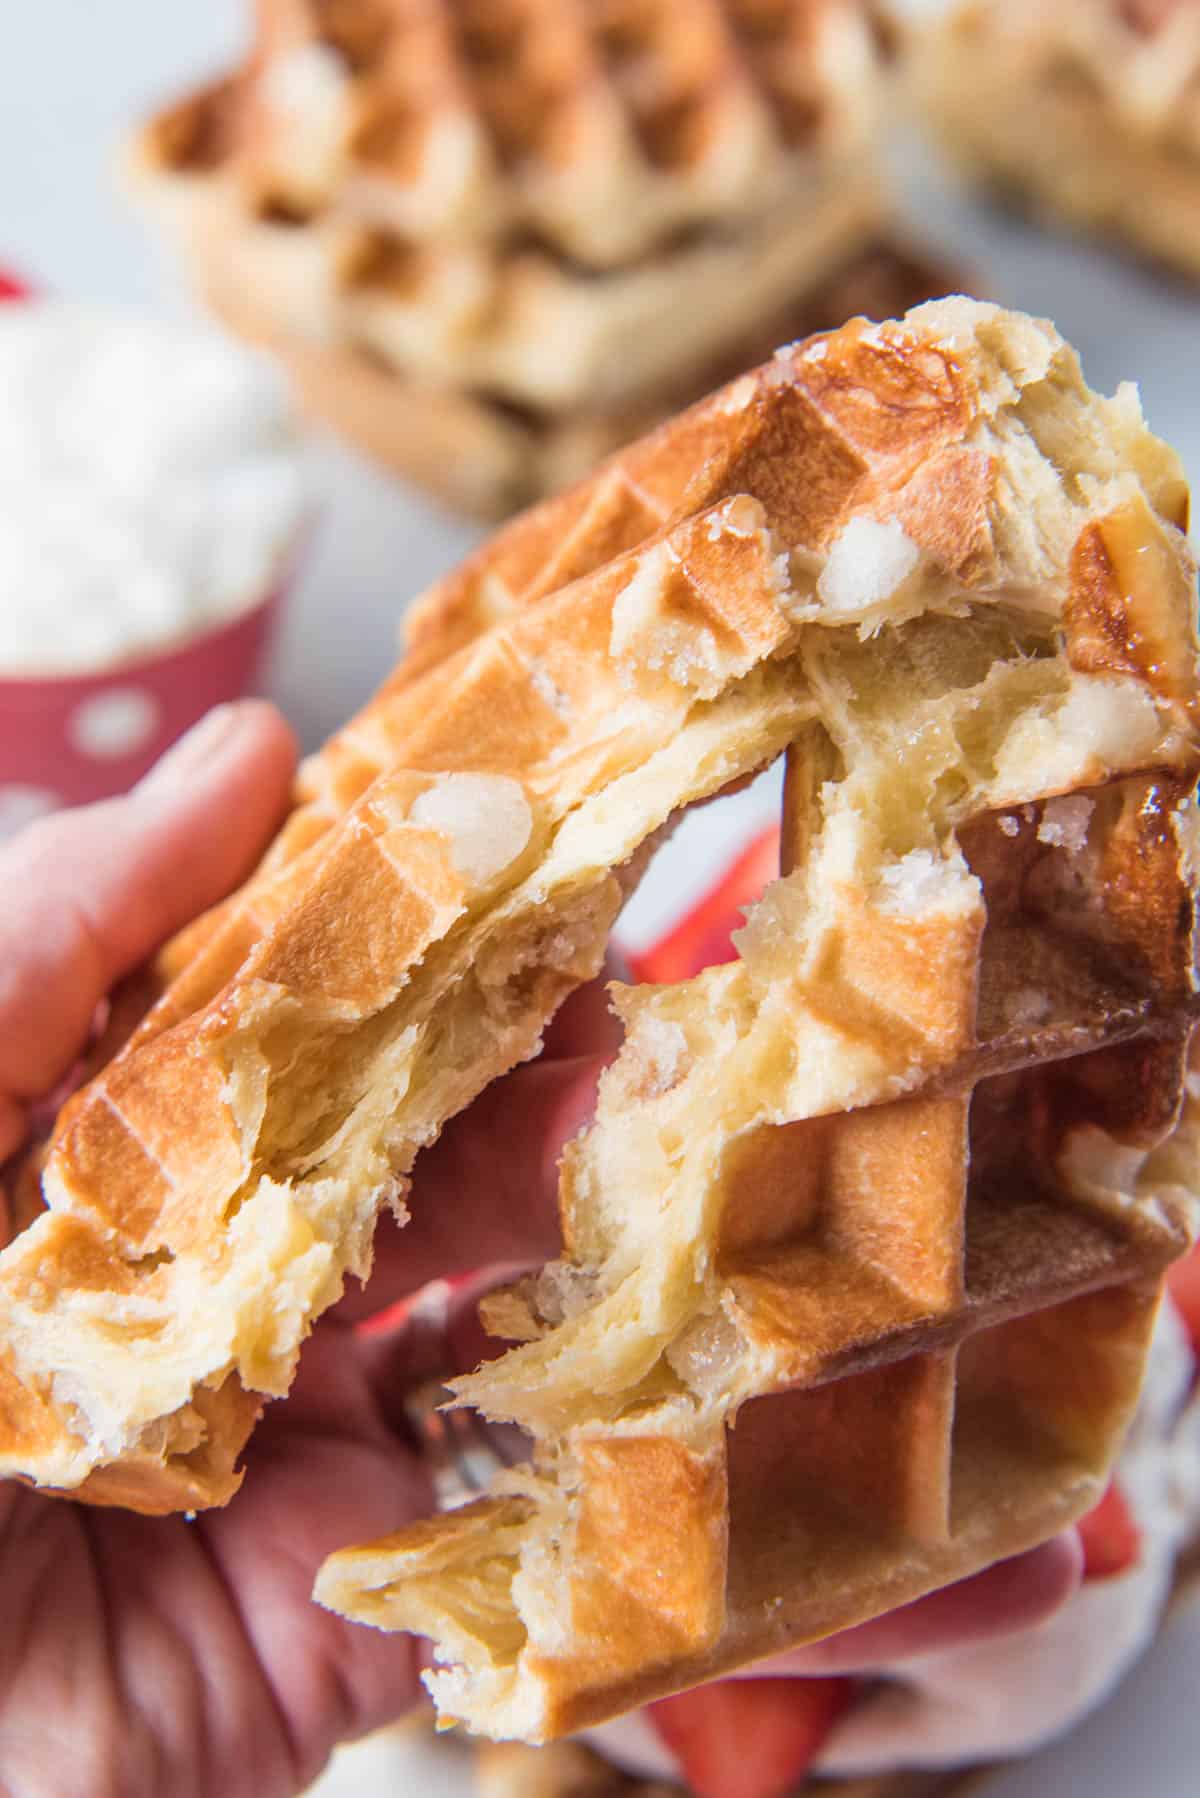 Breaking a waffle in half to show the soft inside.